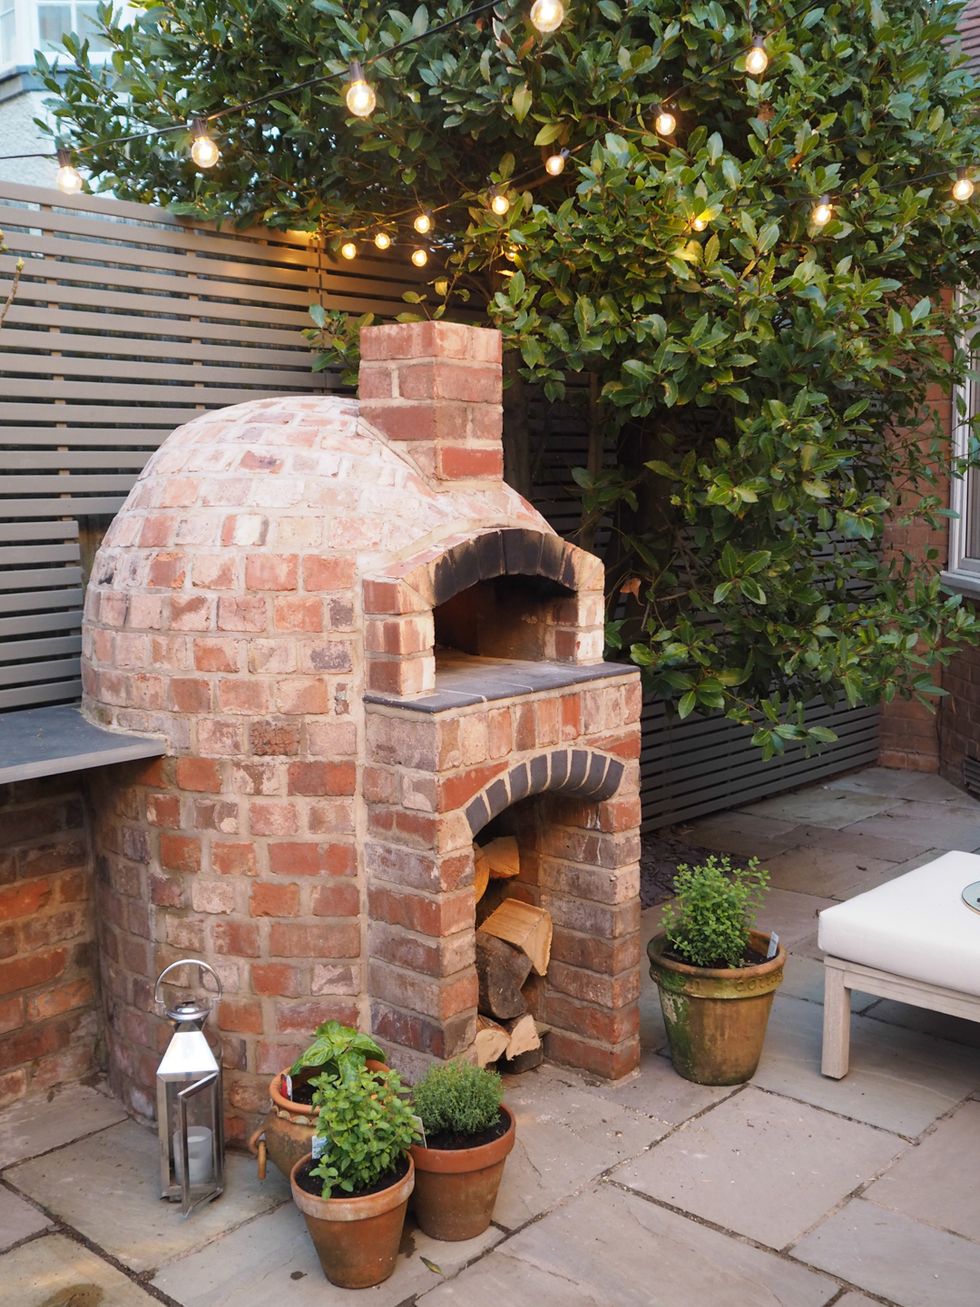 21 Best Outdoor Kitchen Ideas for Any Budget